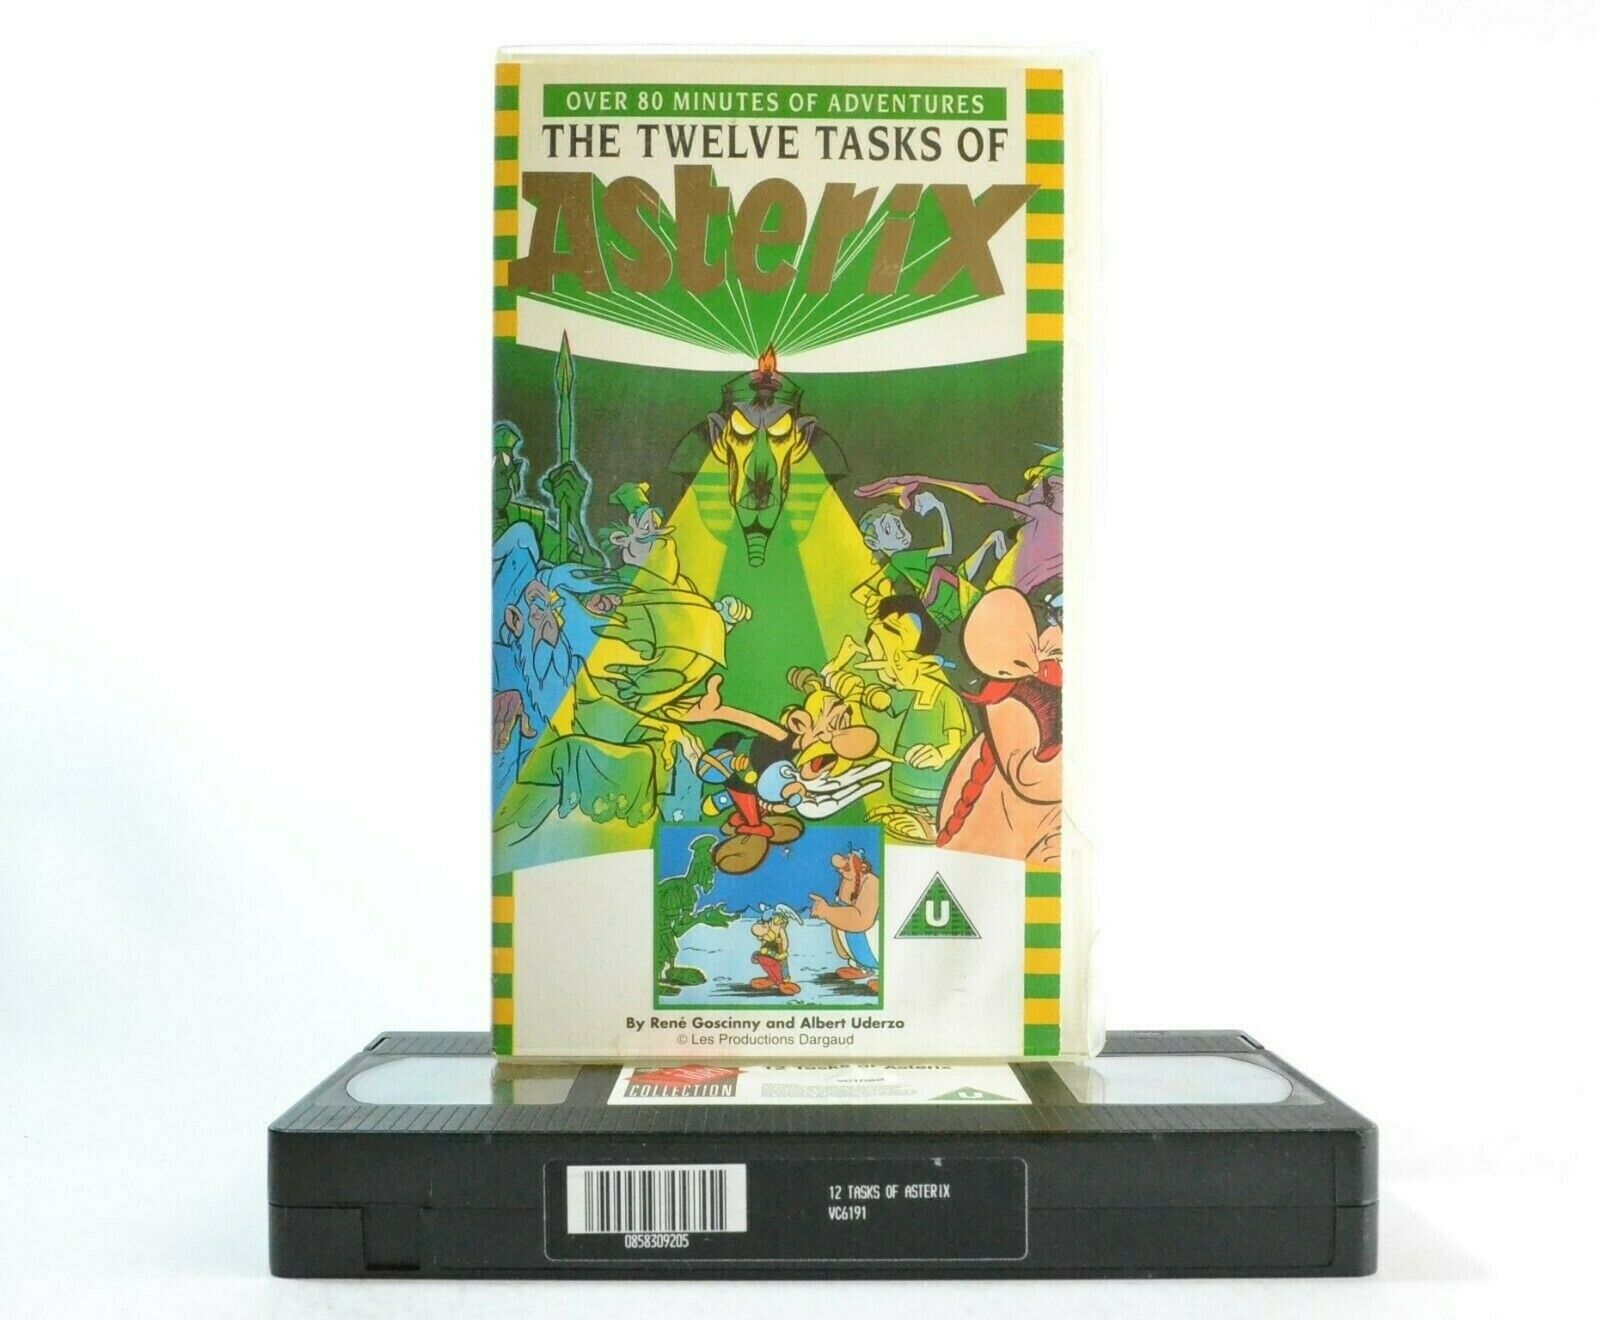 The Twelve Task Of Asterix: Classic Animation (1984) - Children's - Pal VHS-